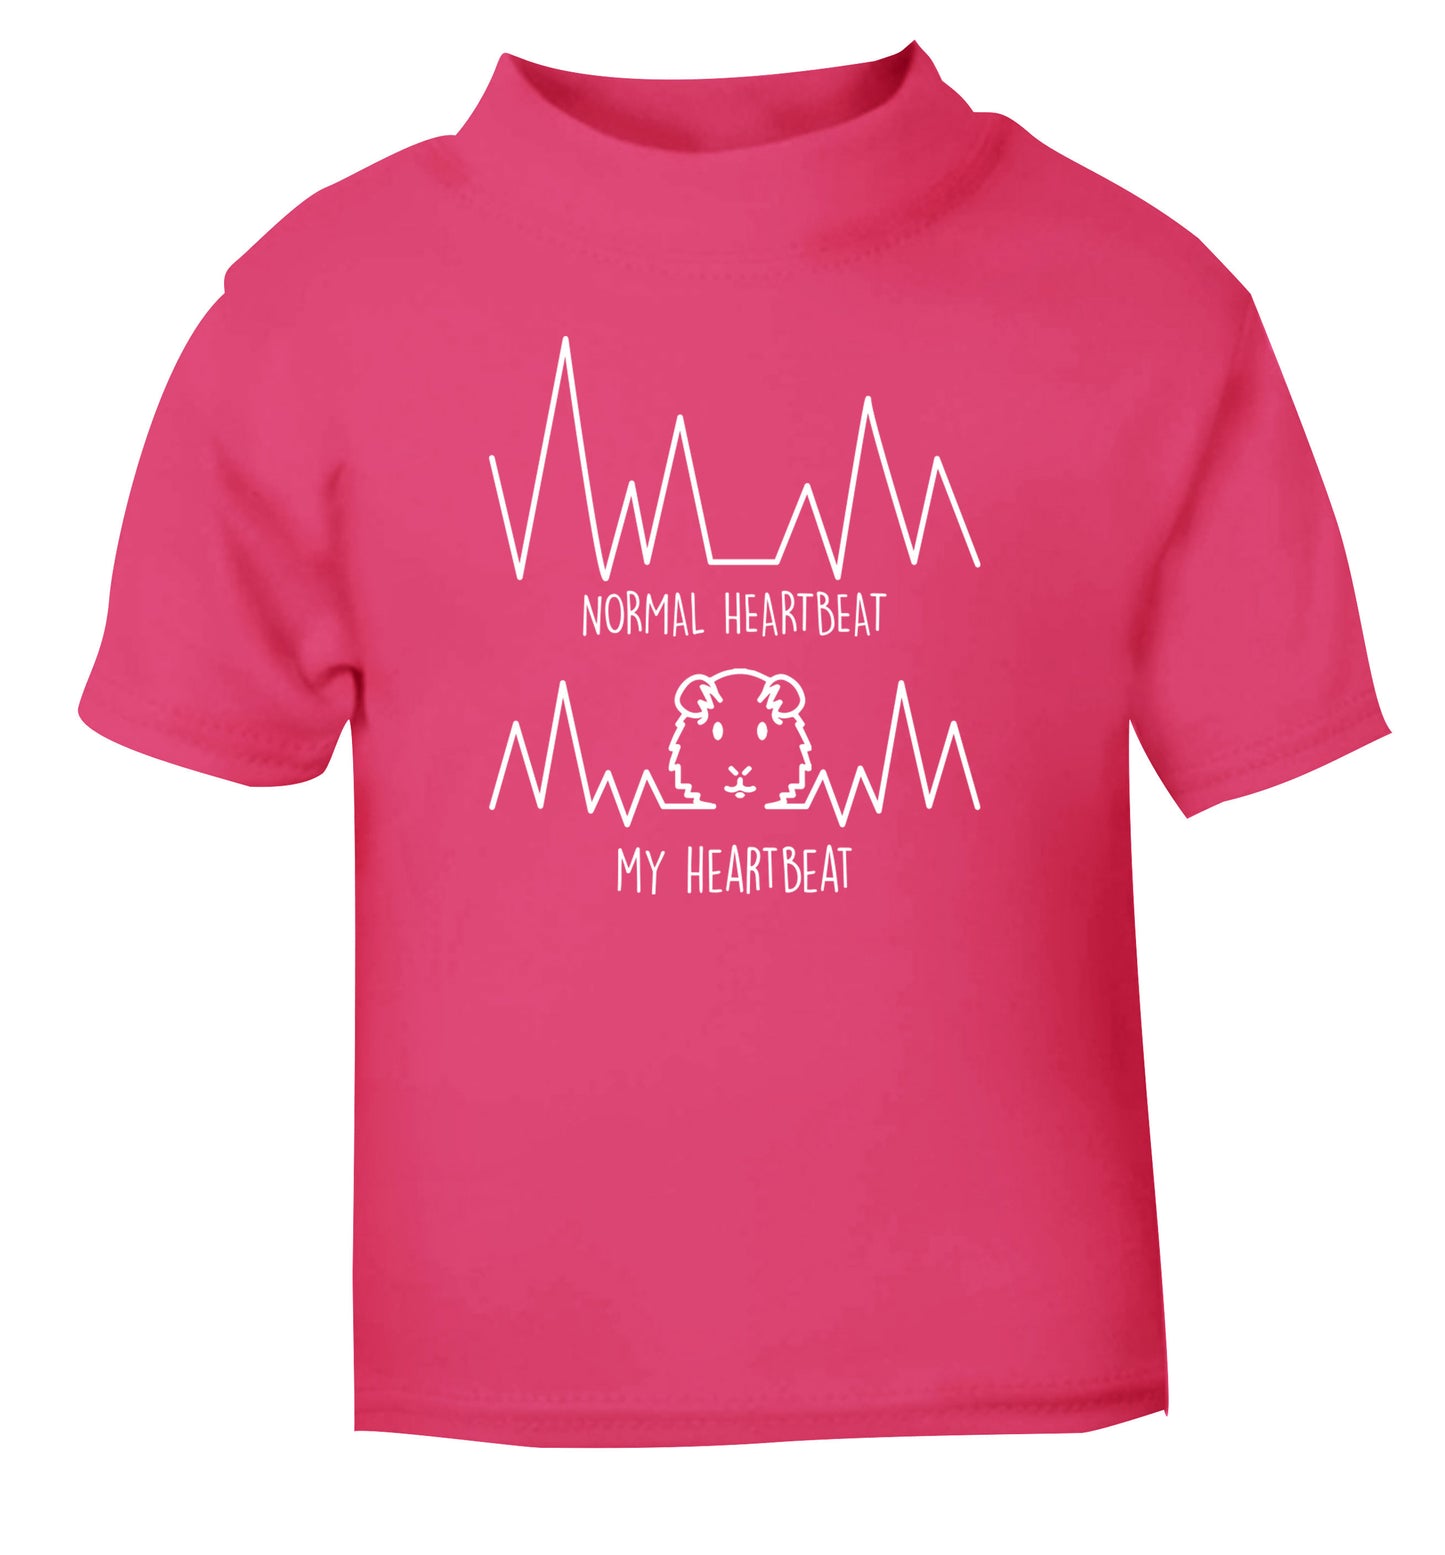 Normal heartbeat vs my heartbeat guinea pig lover pink Baby Toddler Tshirt 2 Years